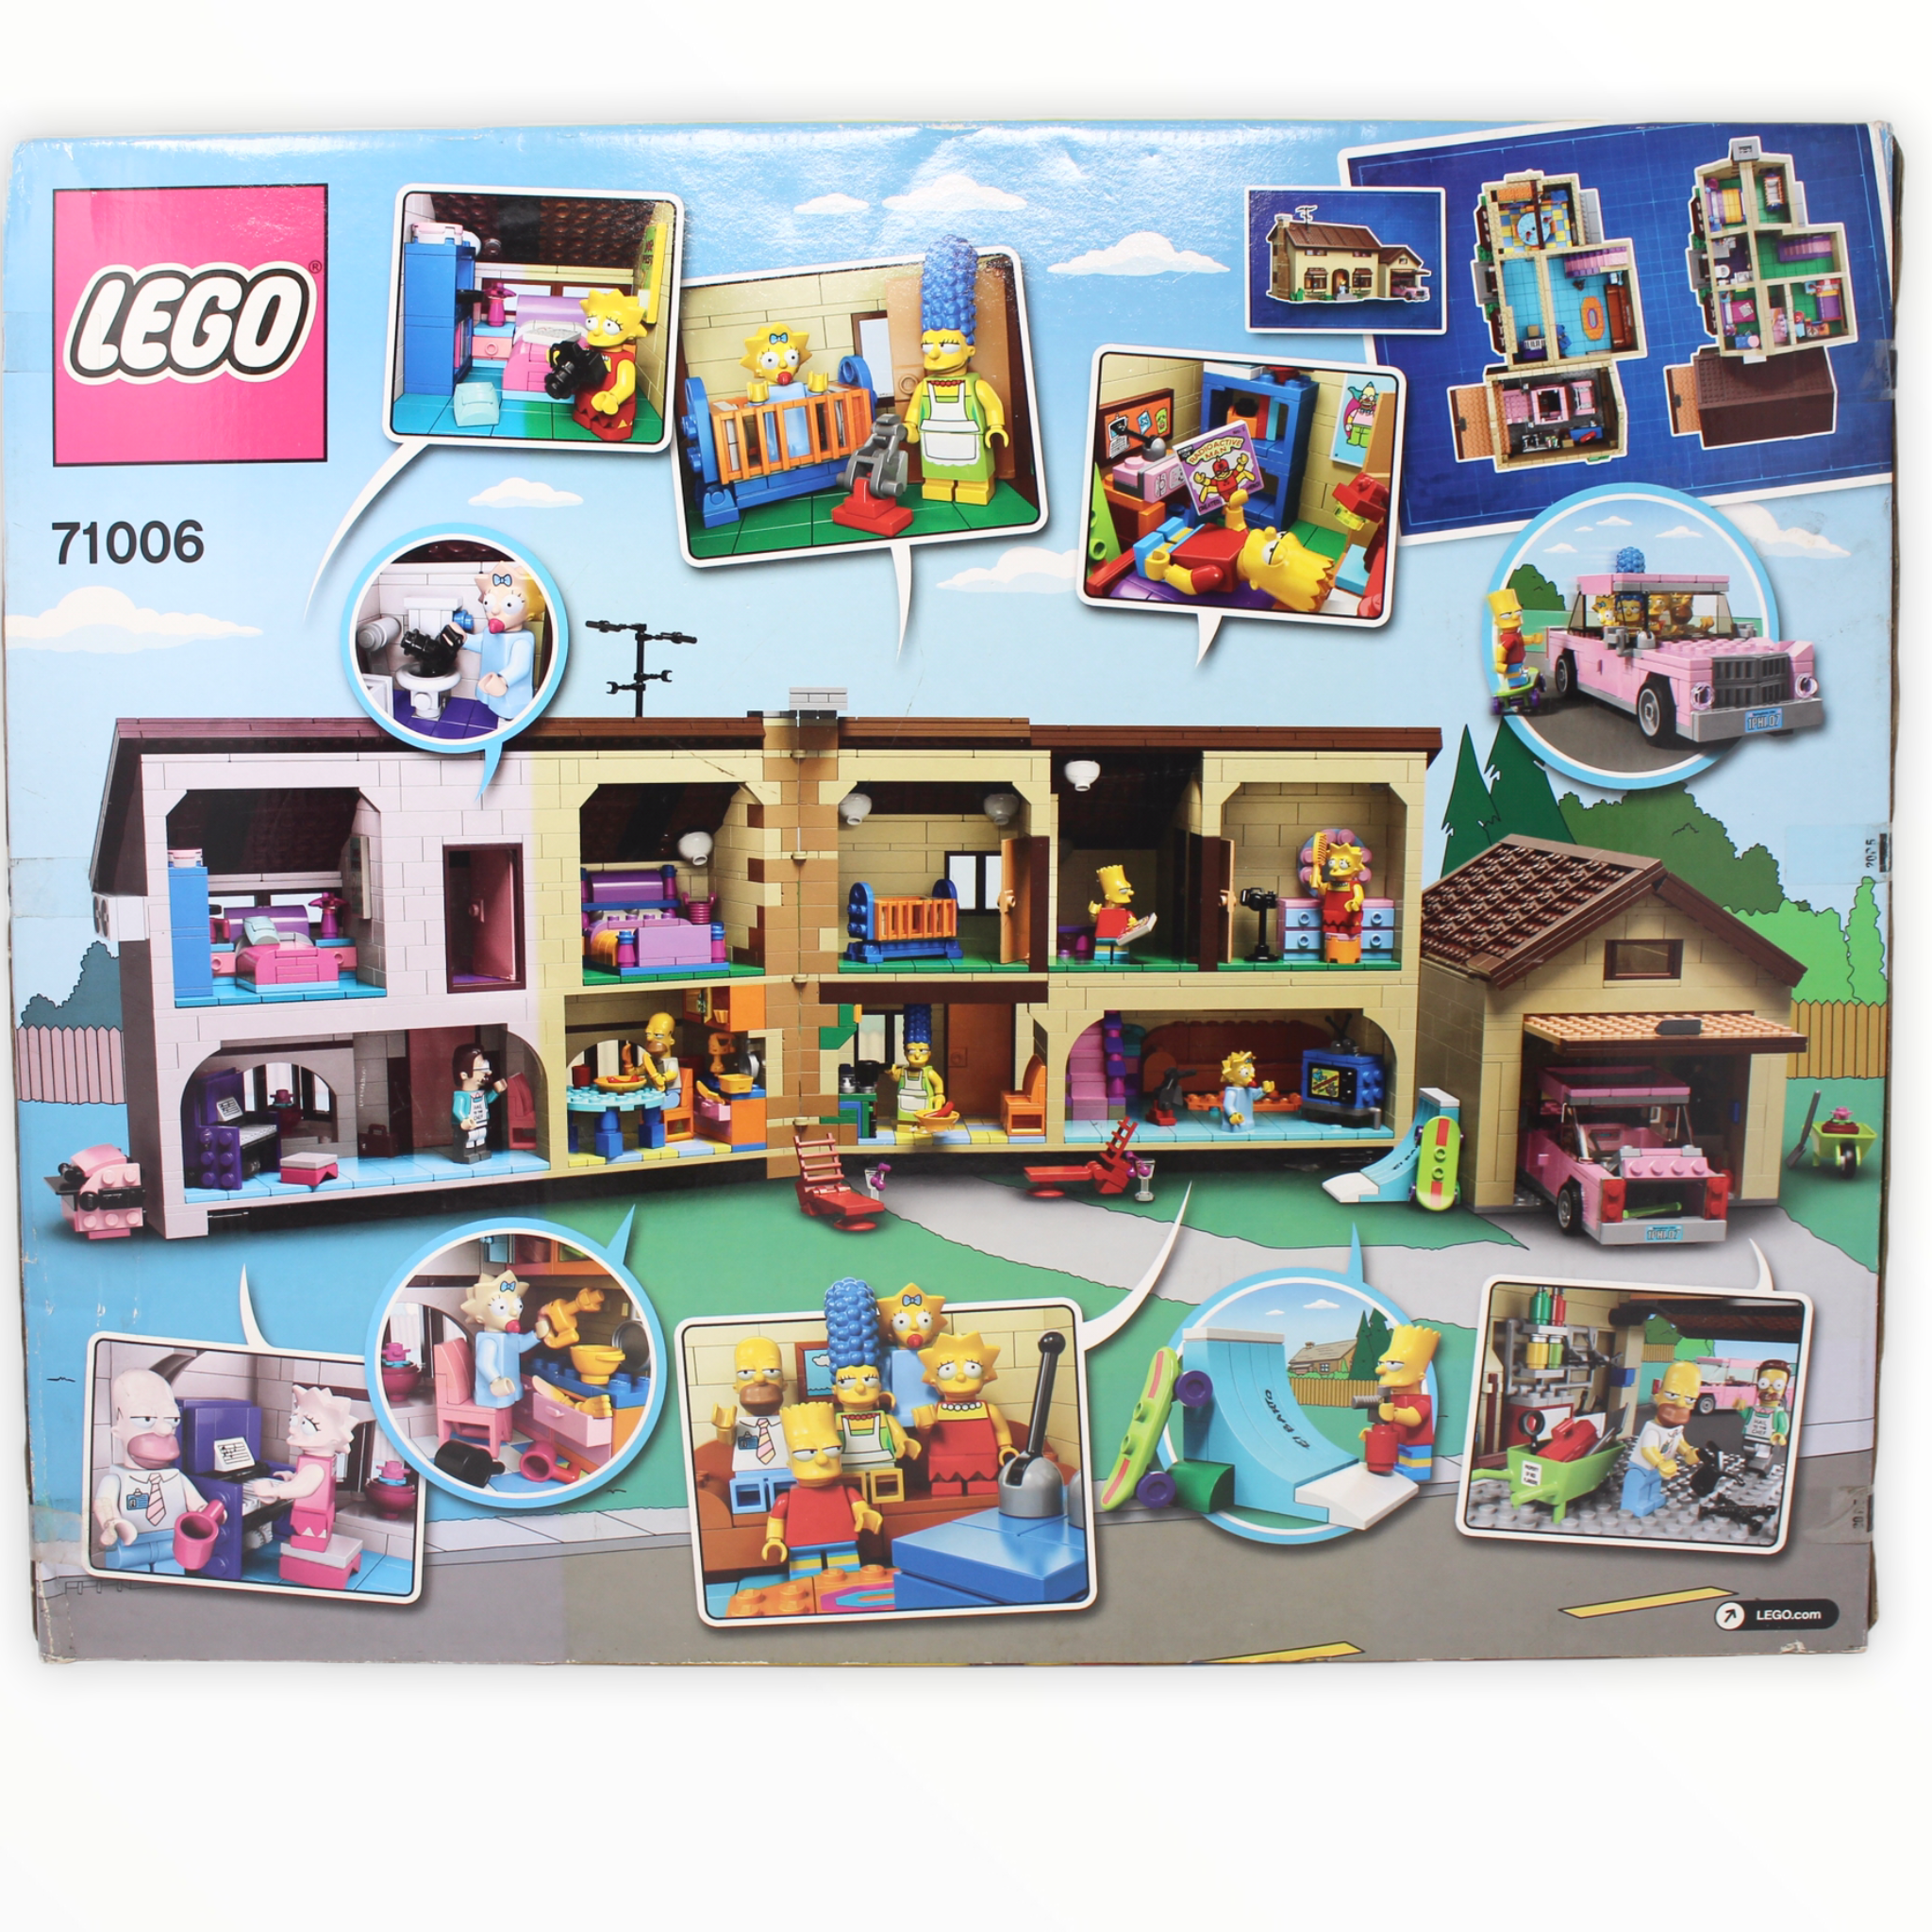 Retired Set 71006 LEGO The Simpsons House